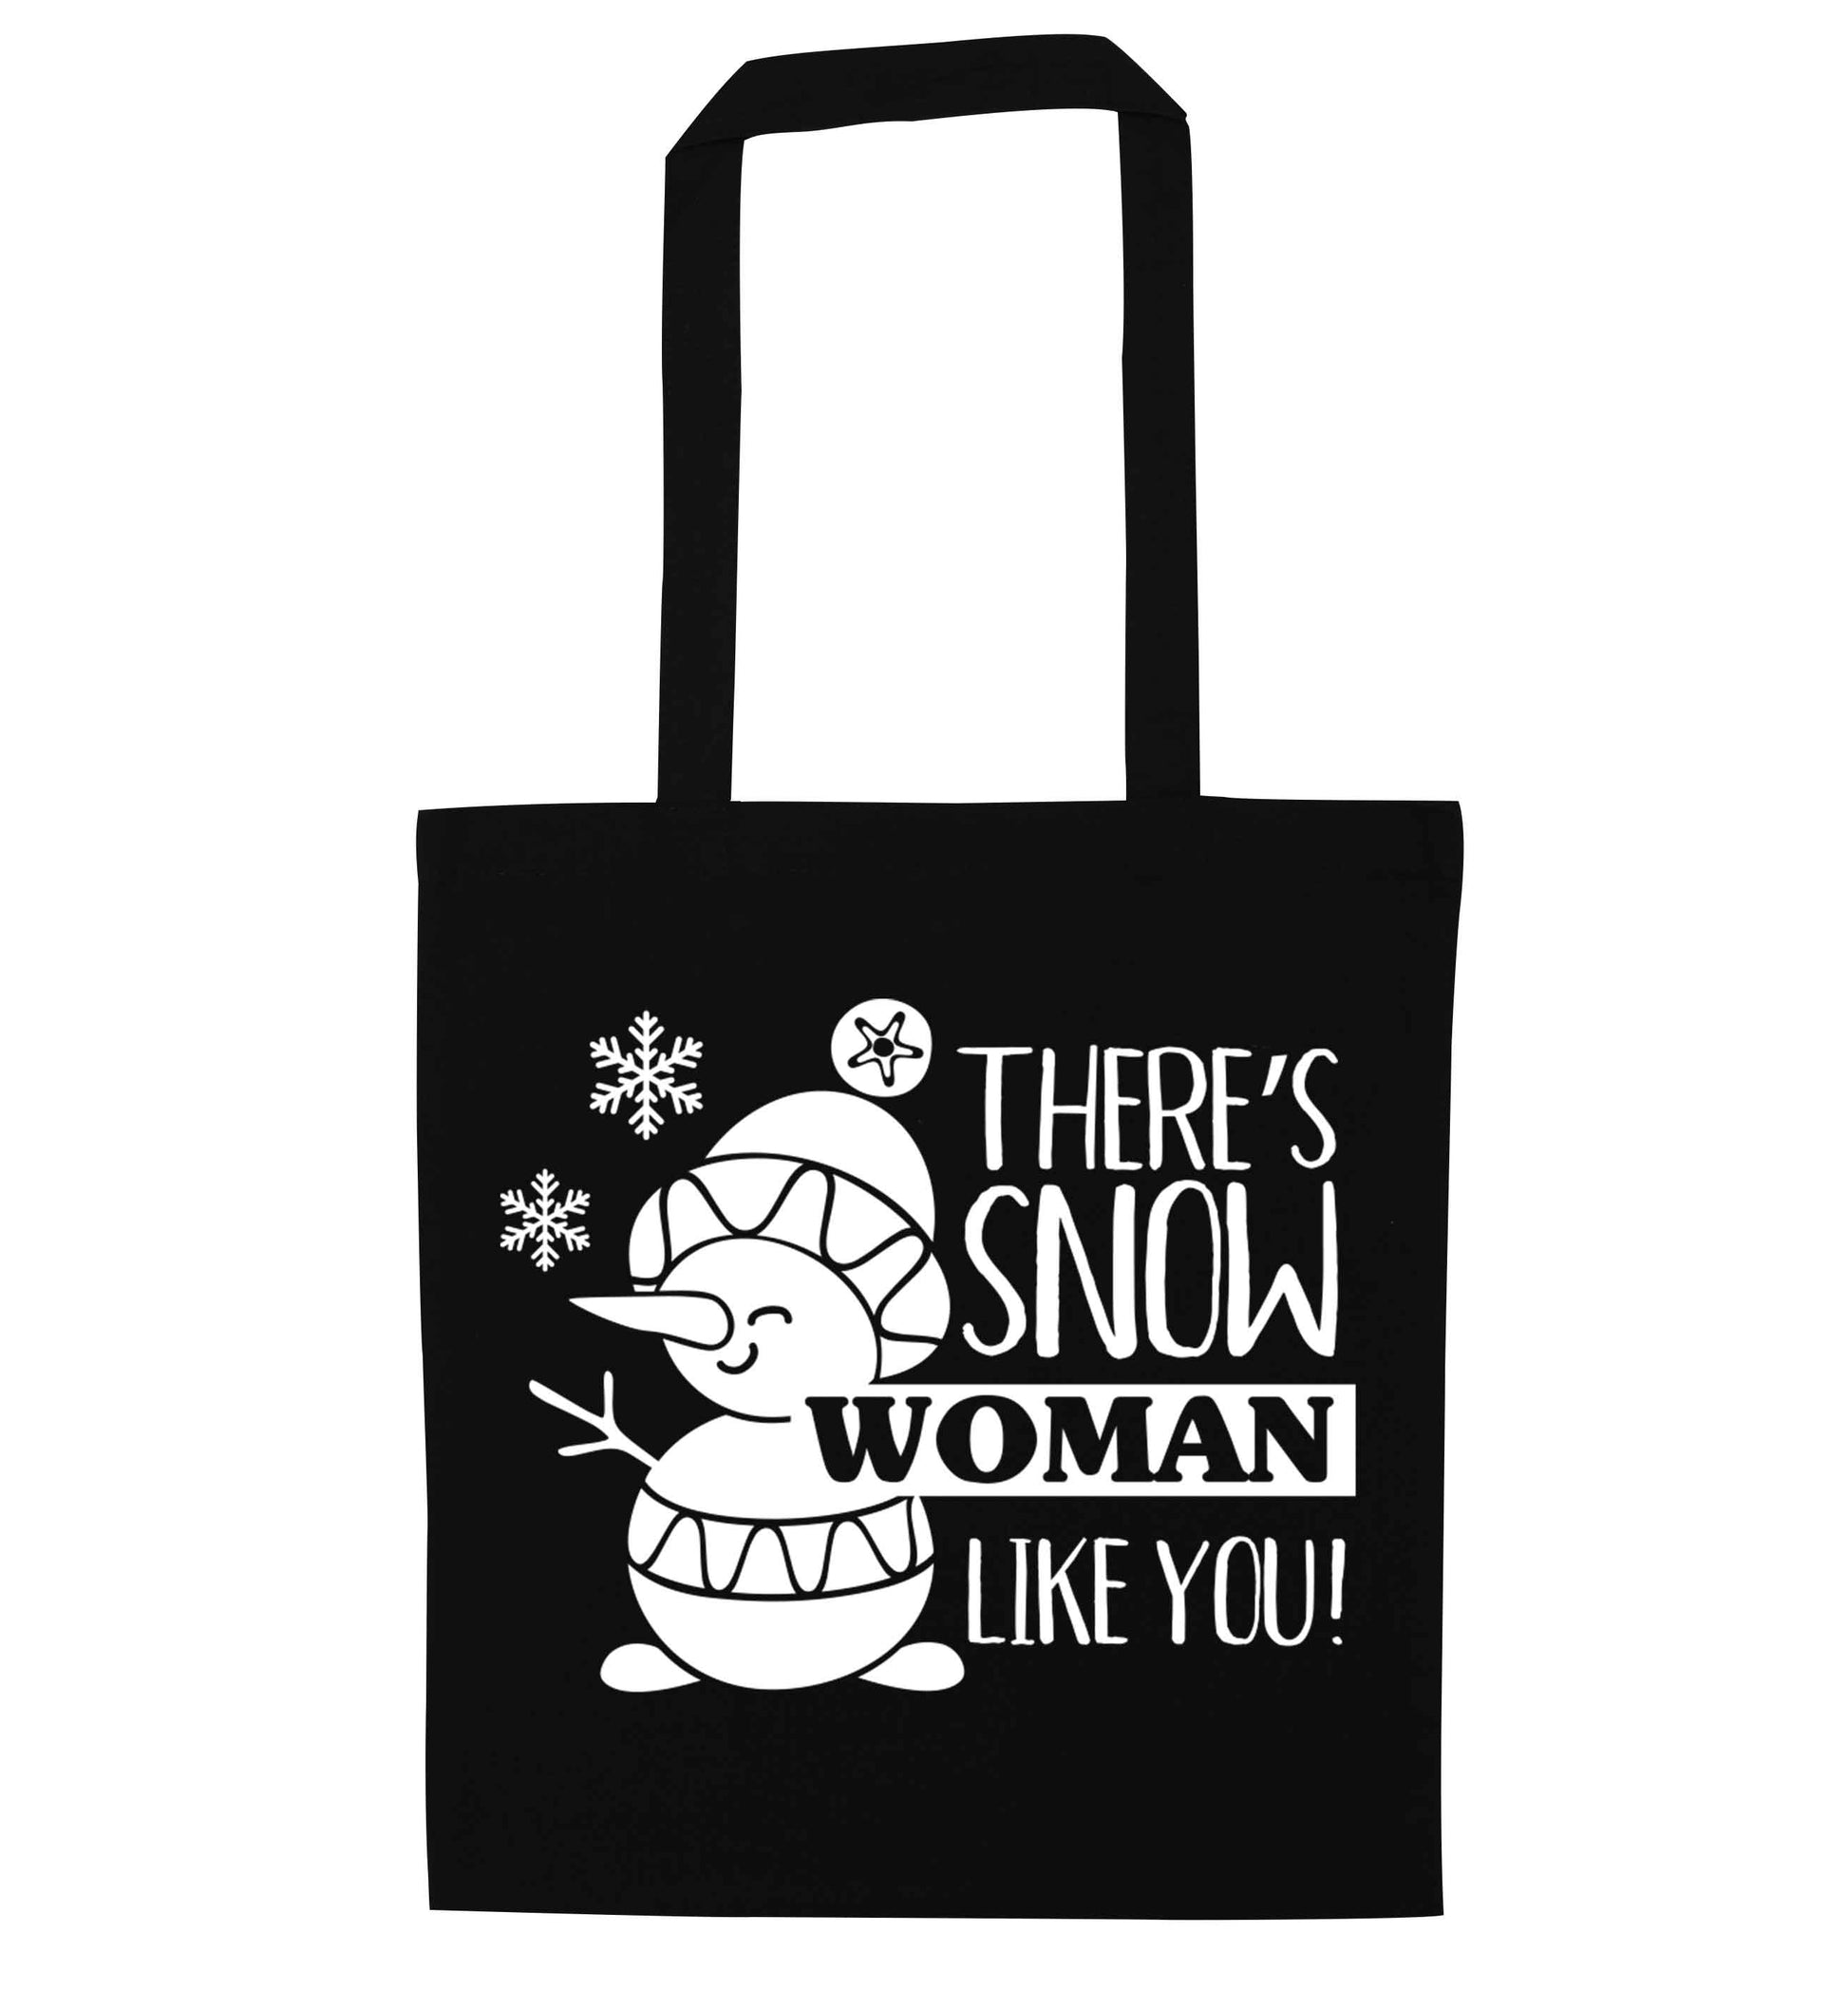 There's snow woman like you black tote bag